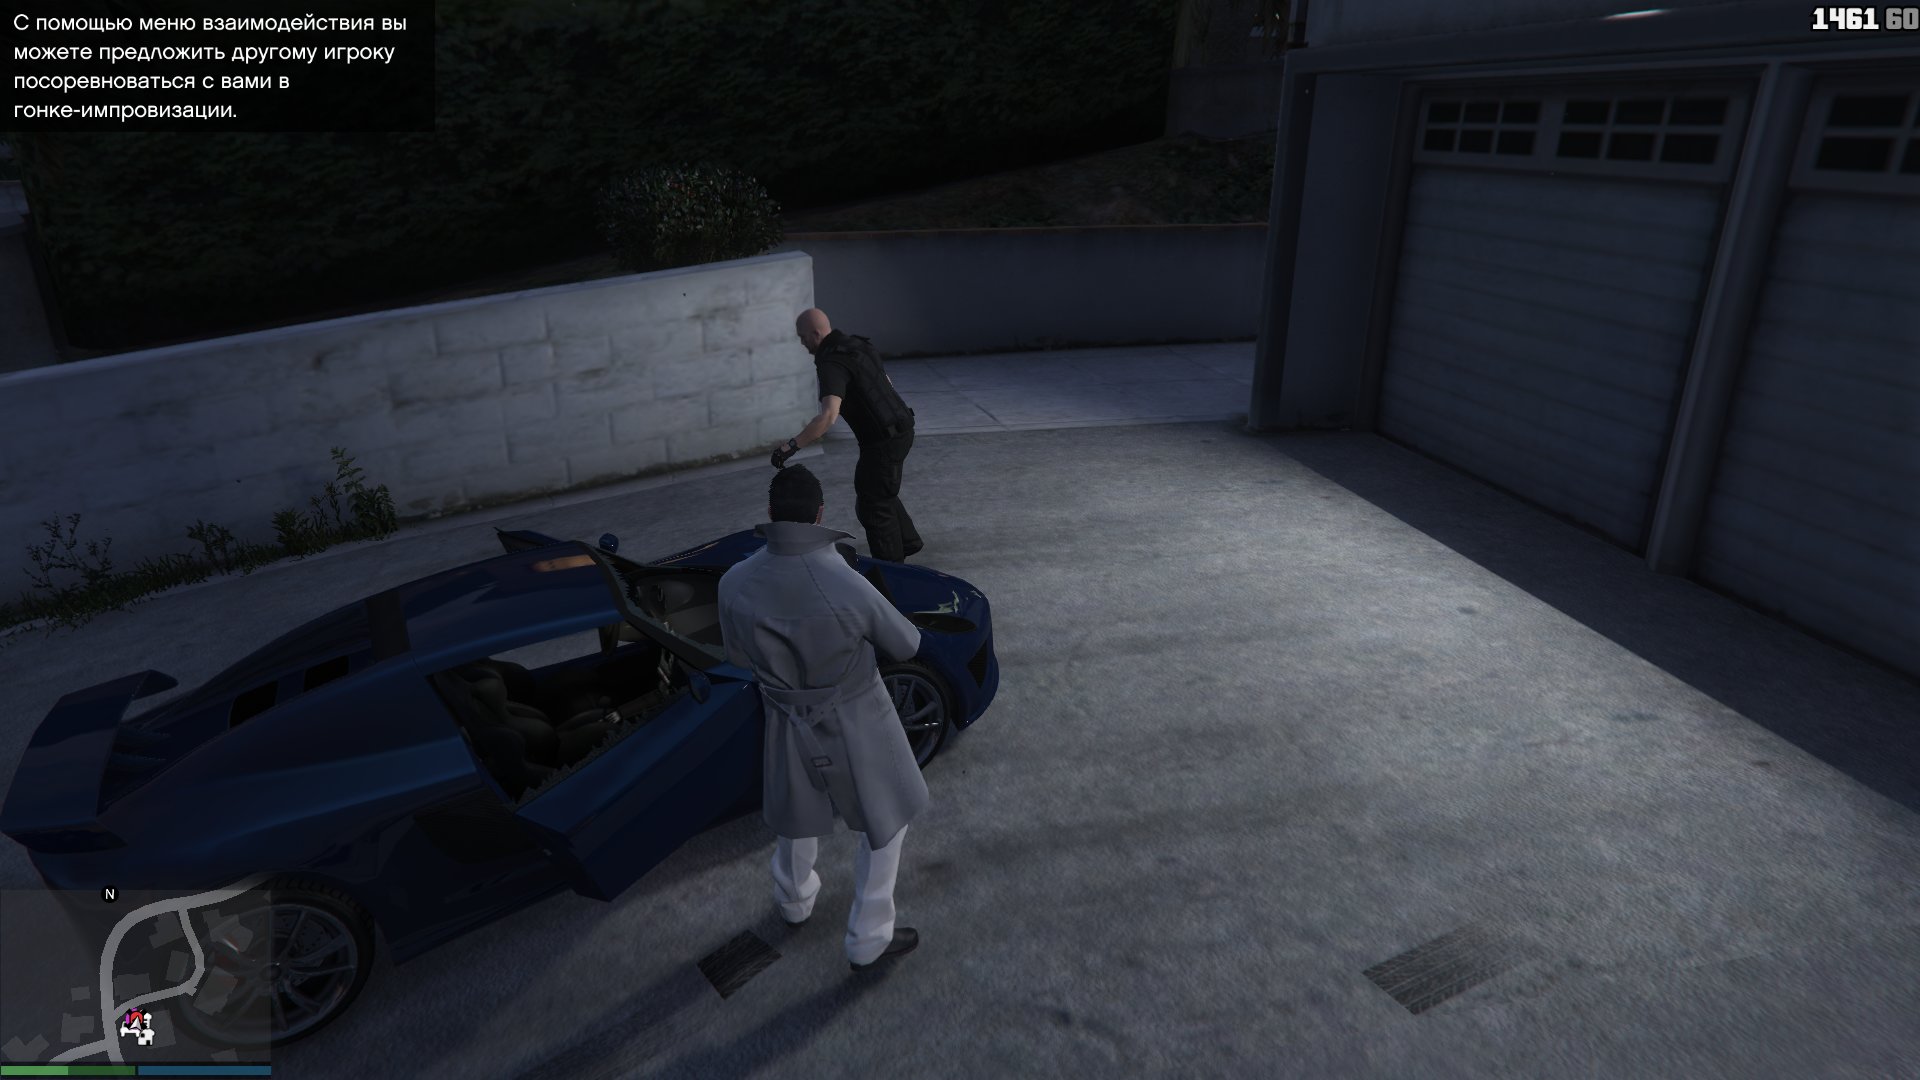 Unsupported gta 5 version detected spb may not work properly фото 99